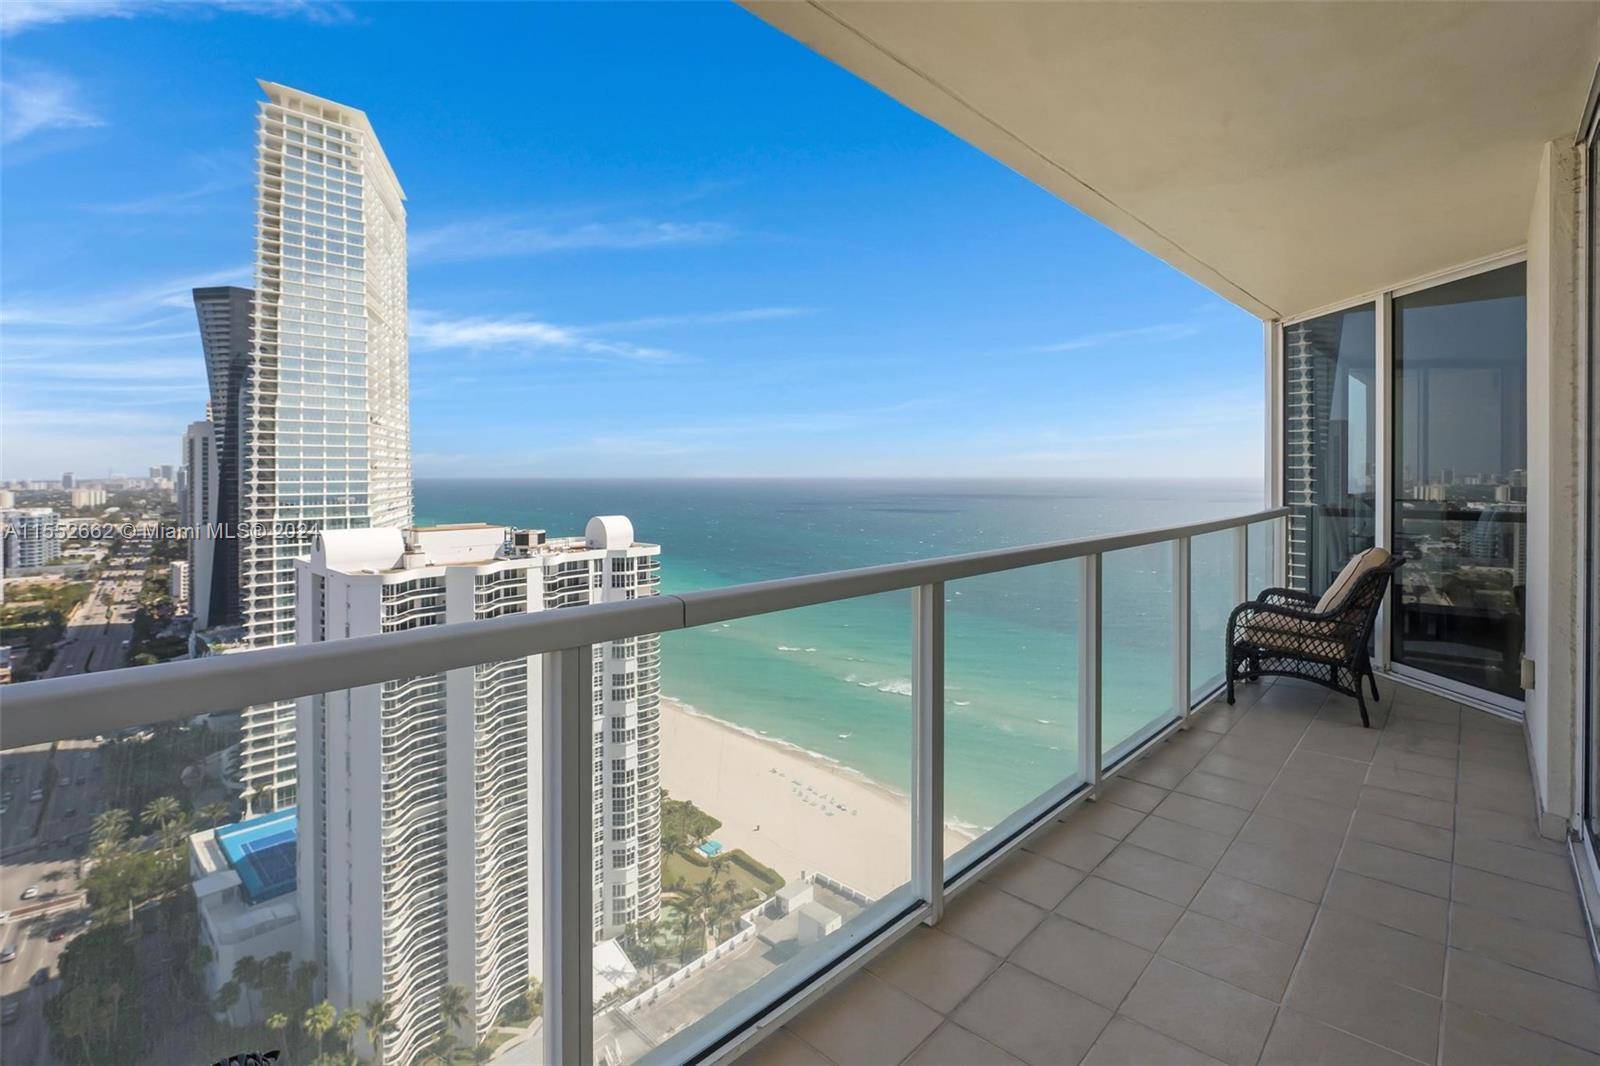 Stunning and spacious 2 2 corner unit 1, 423 sf now available for rent at La Perla, oceanfront condominiums in Sunny Isles Beach !